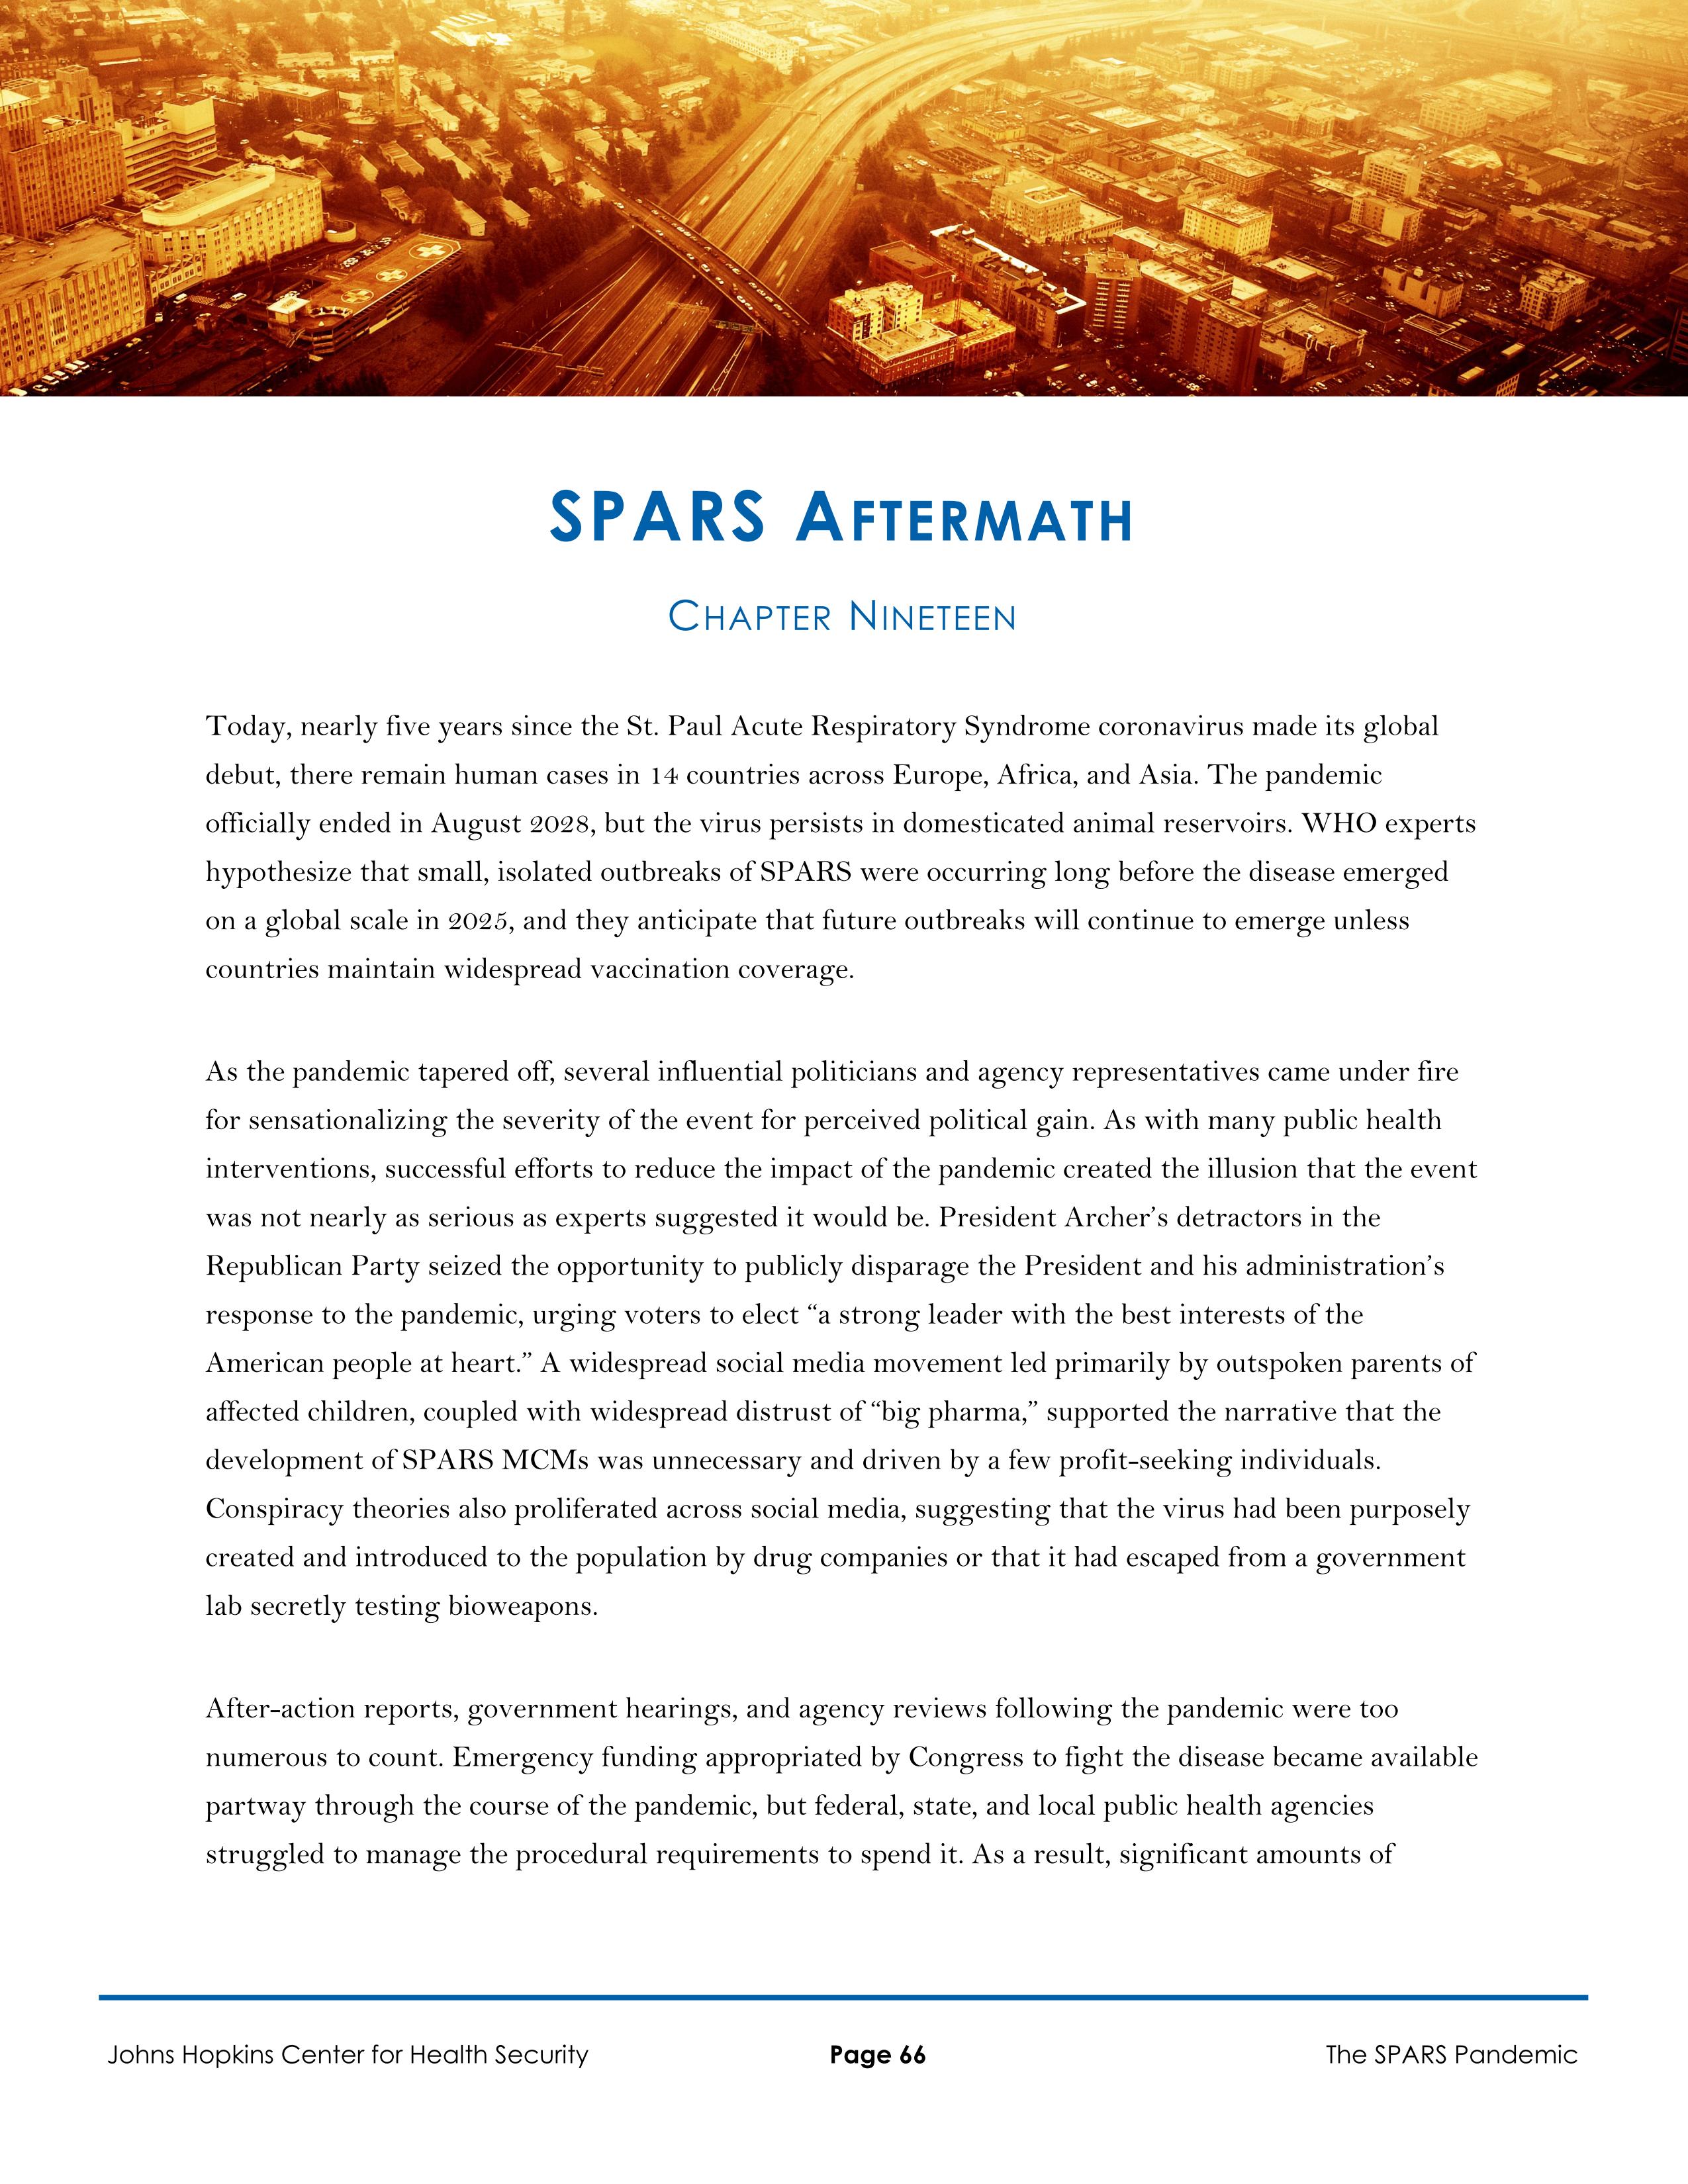 SPARS report from 2017 - pages